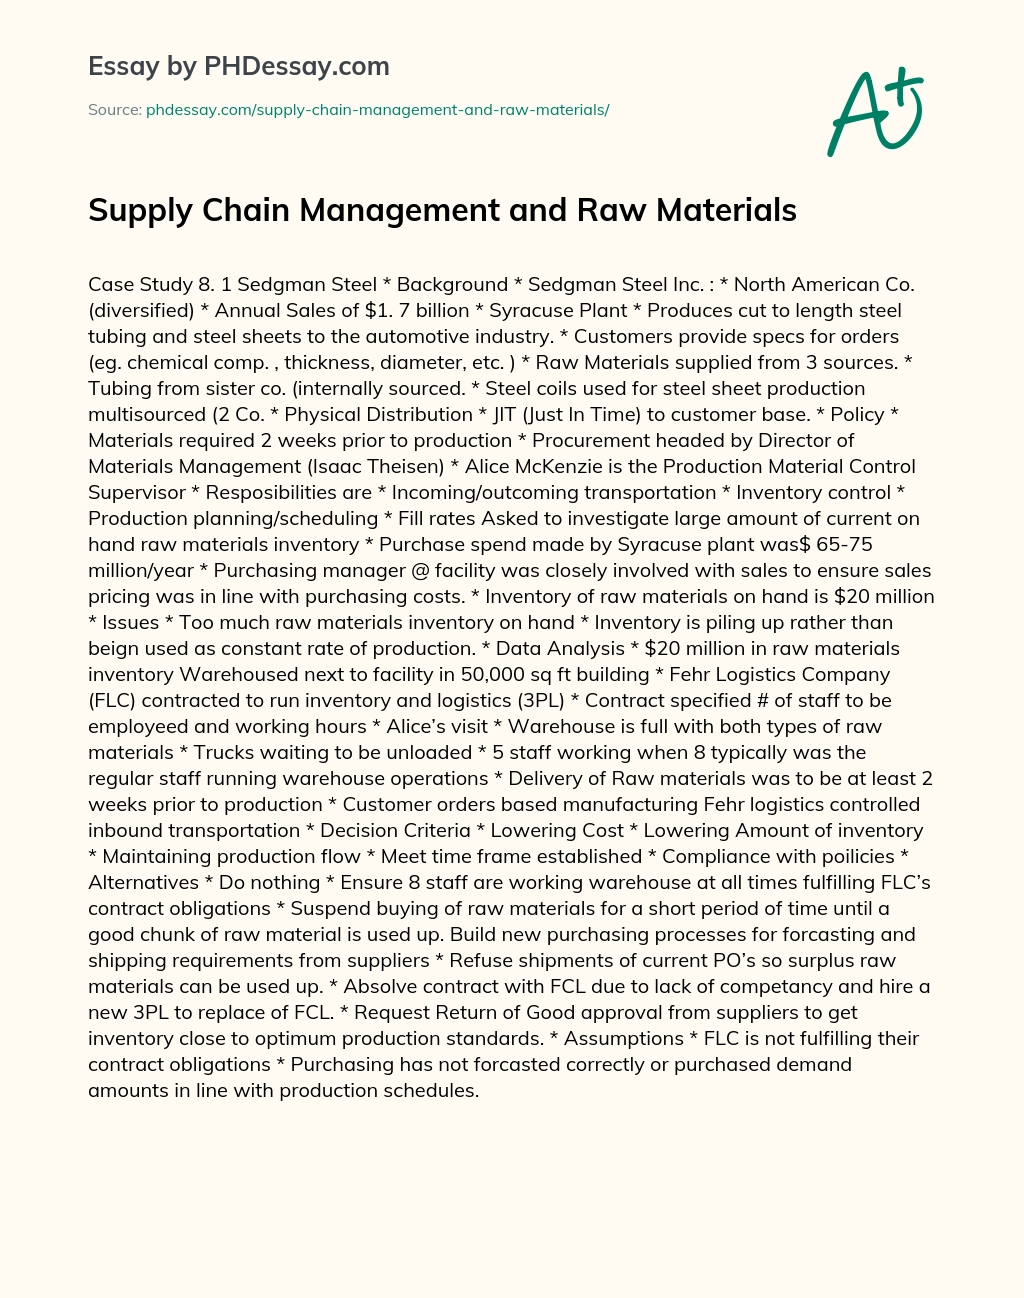 Supply Chain Management and Raw Materials essay